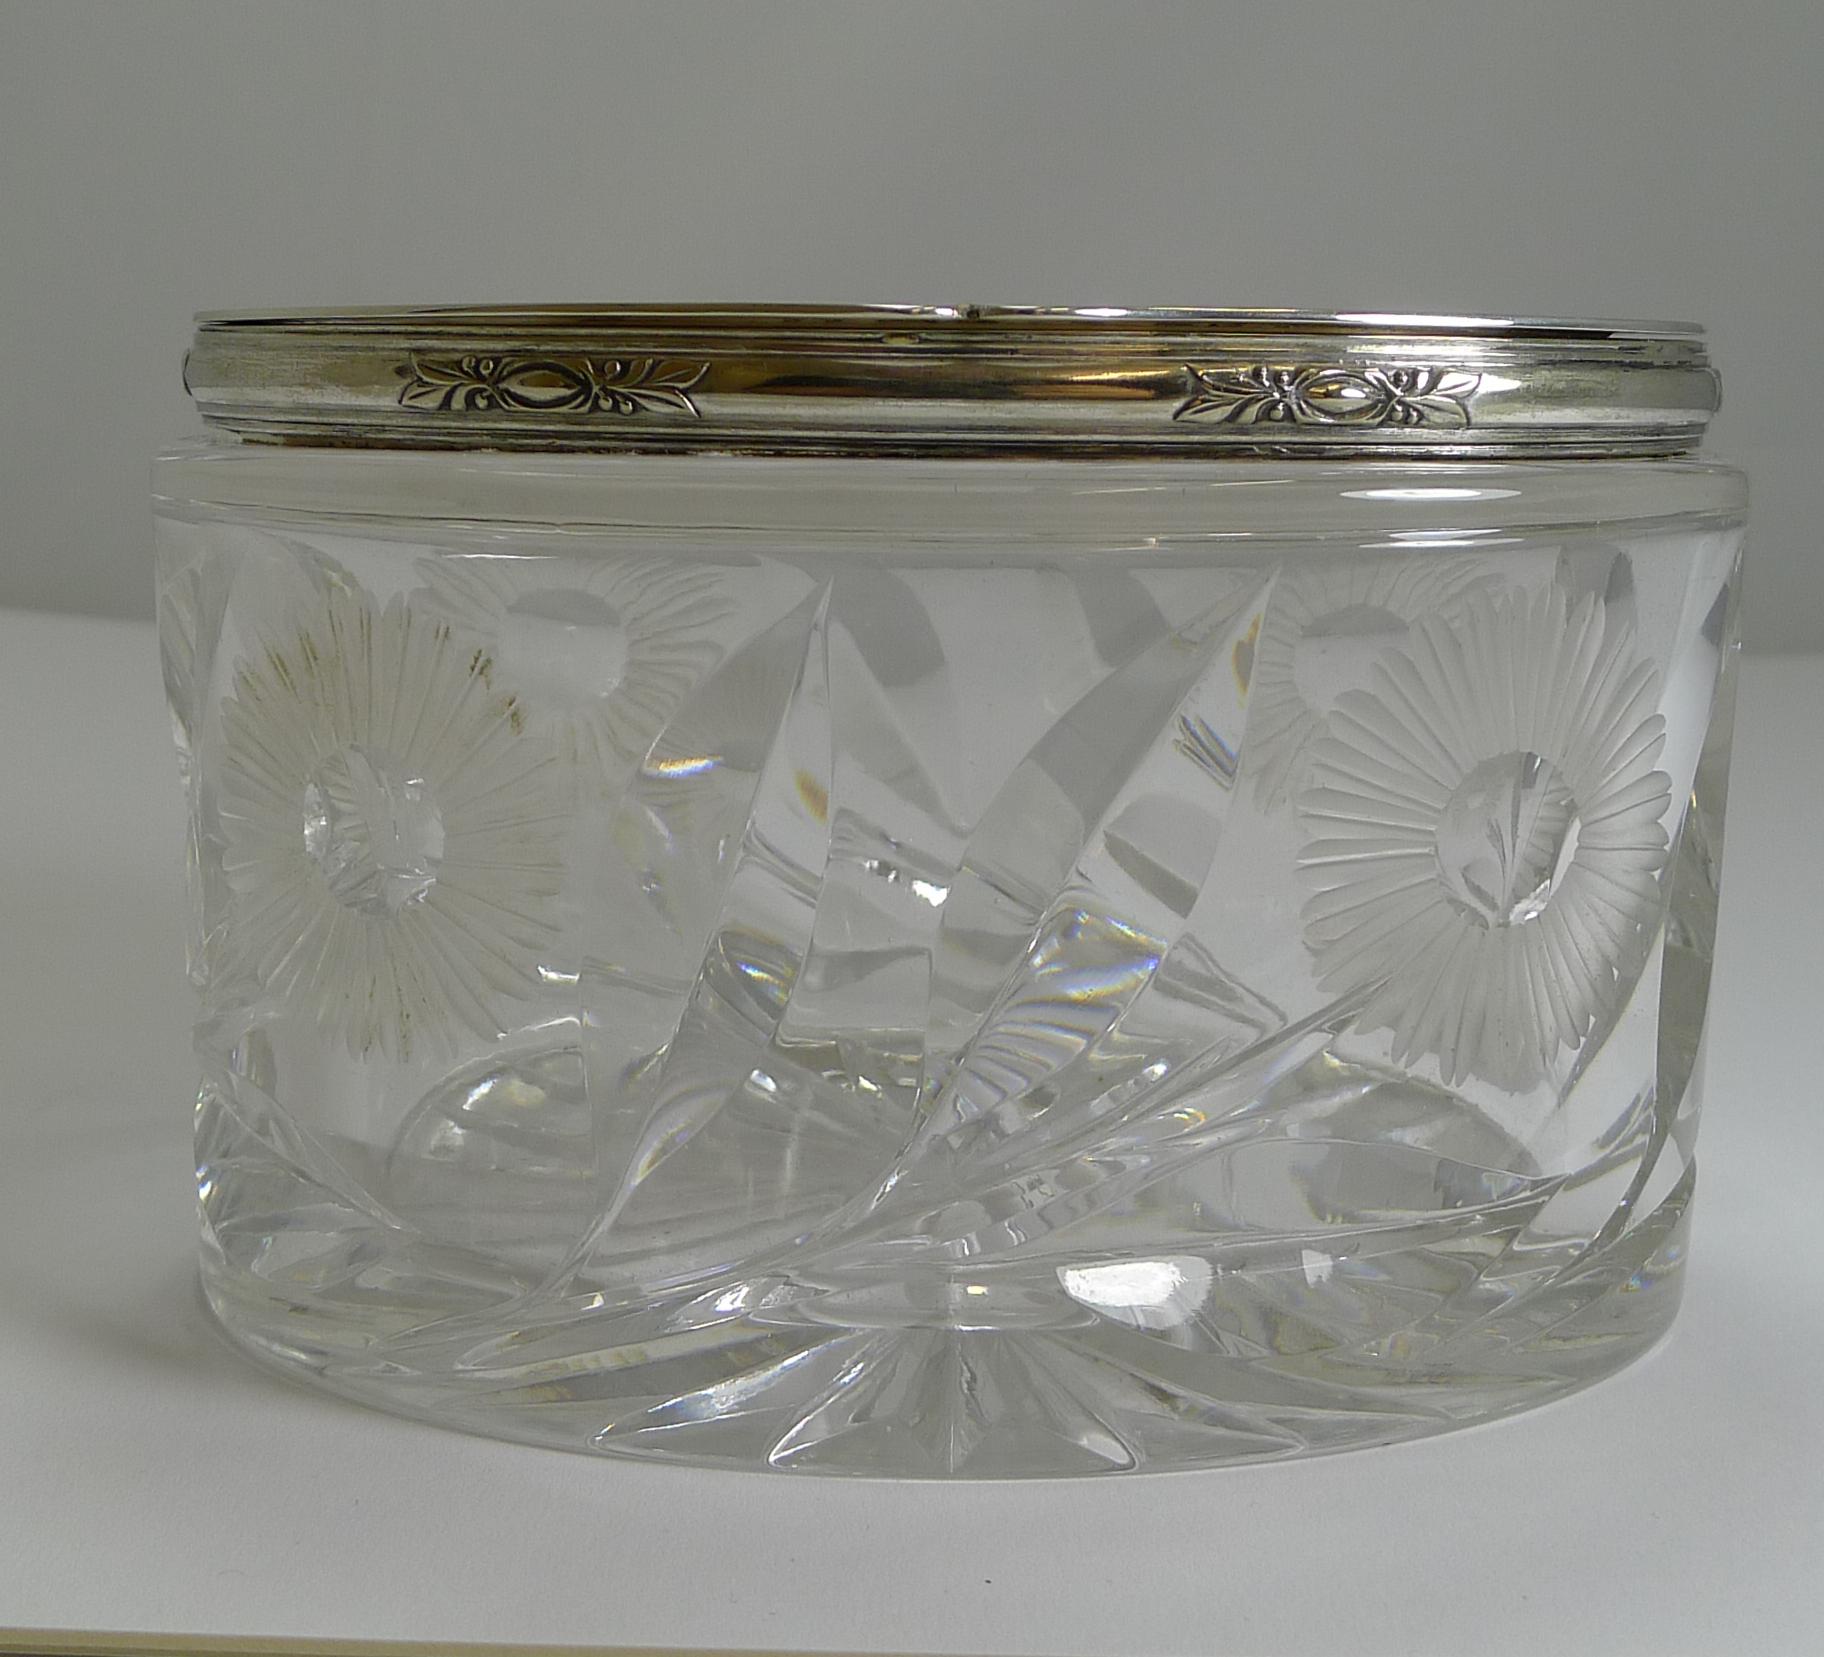 An exceptional quality Art Deco box made from an extremely heavy piece of English crystal beautifully cut with Sunflowers around the sides, with Sunflower heads wheel engraved giving it a three dimensional feel.

The collar and hinged lid is made